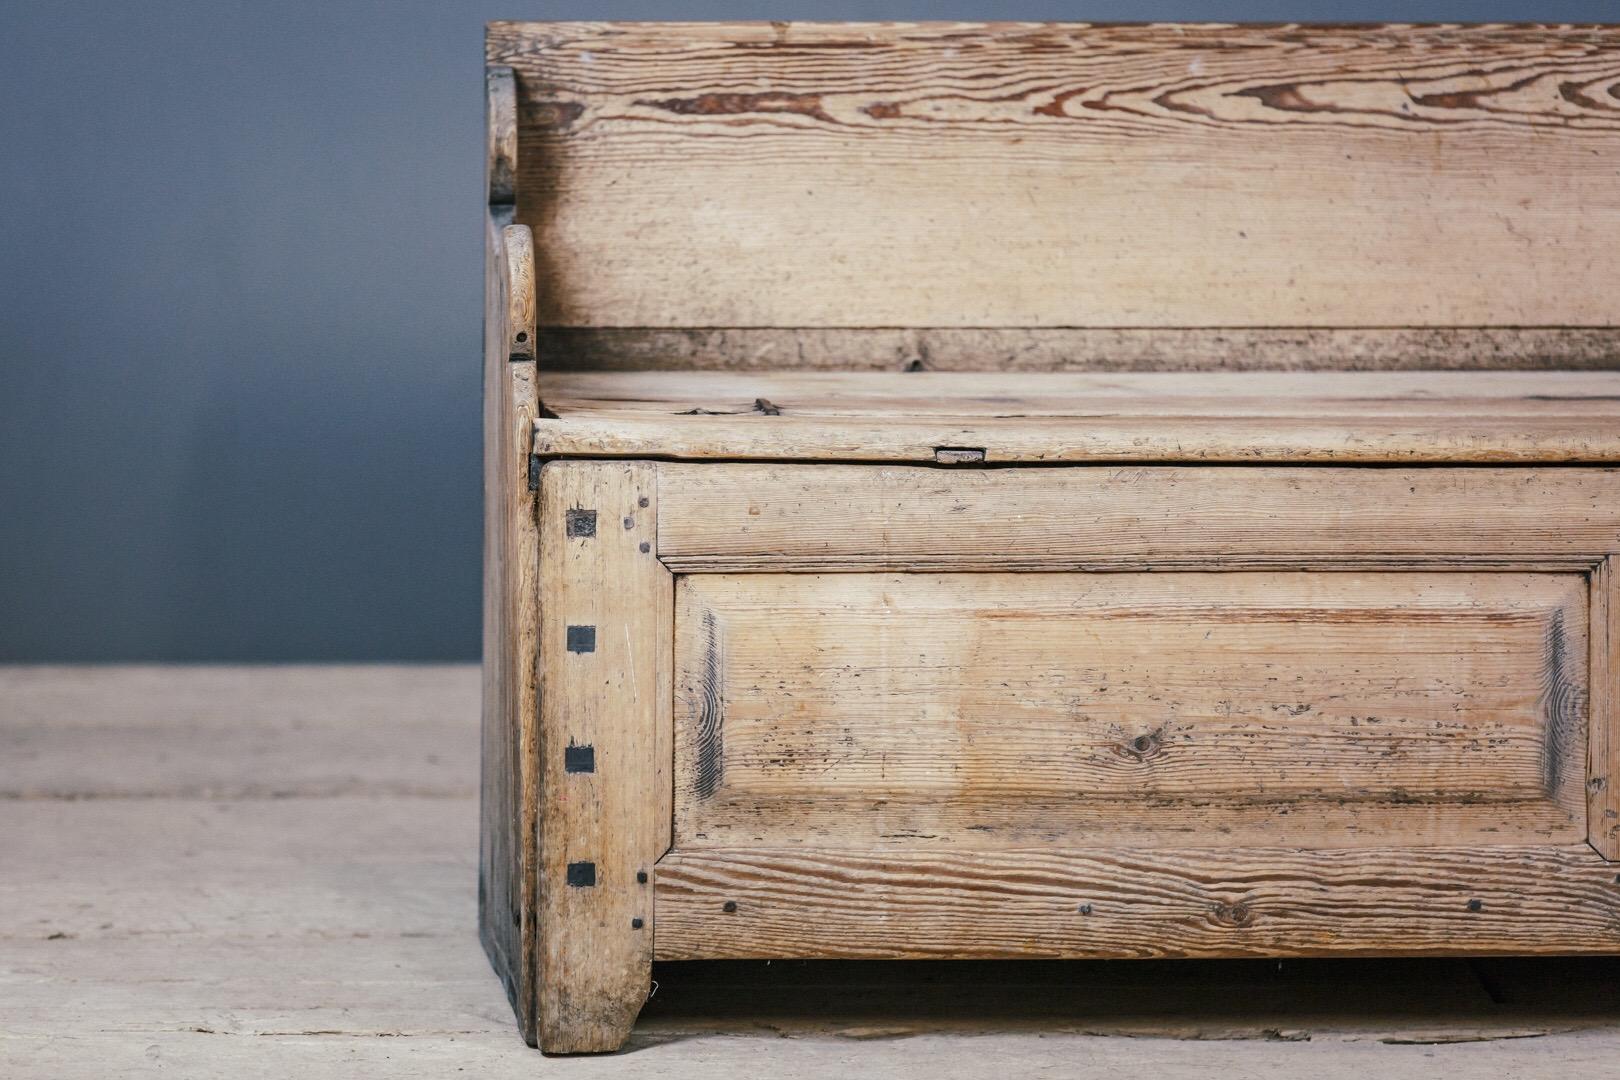 Extraordinary large Swedish box settle in pine, wonderful dry surface, this example has never been painted and weathered wonderfully. Sourced in Jamtland, Central Sweden from a forest cottage. The lid opens to provide cavernous storage, historical